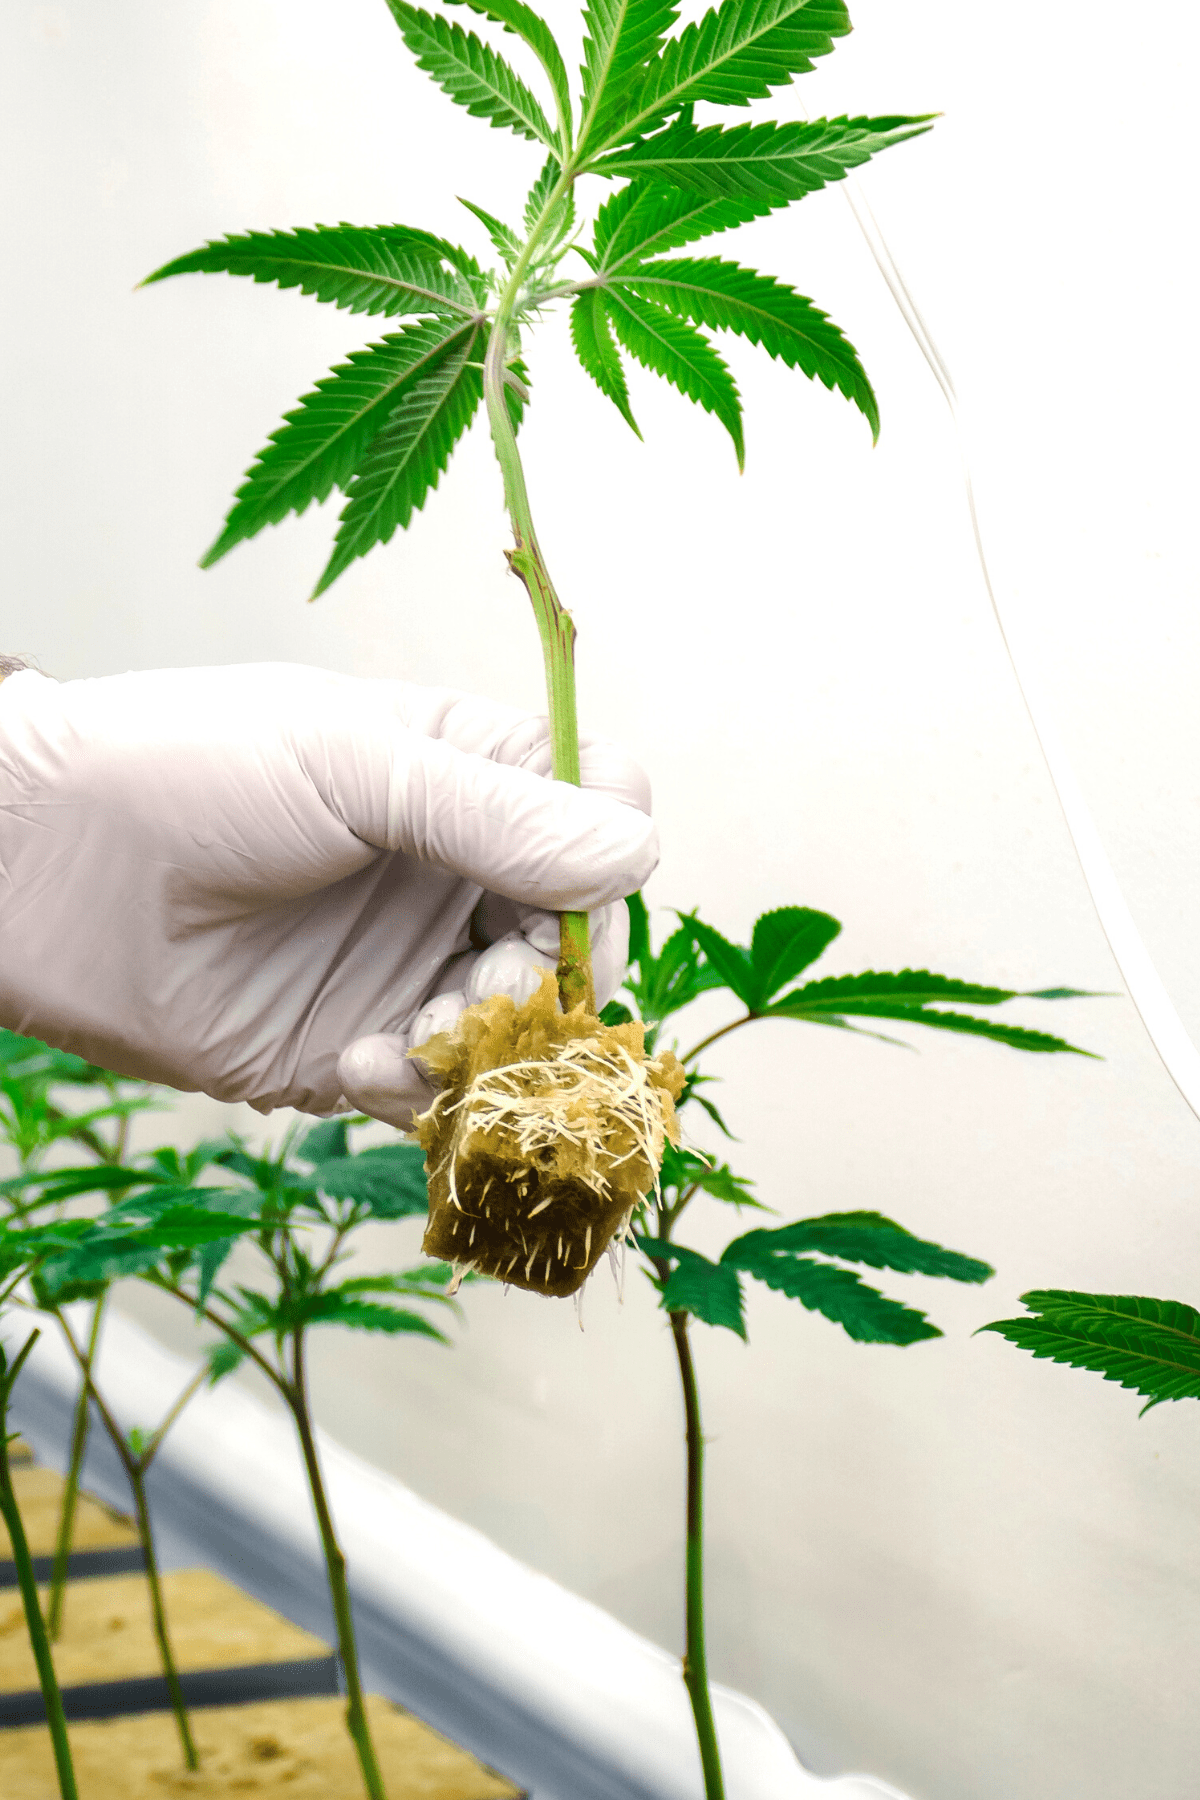 A white gloved hand holding a cannabis plant showing the roots